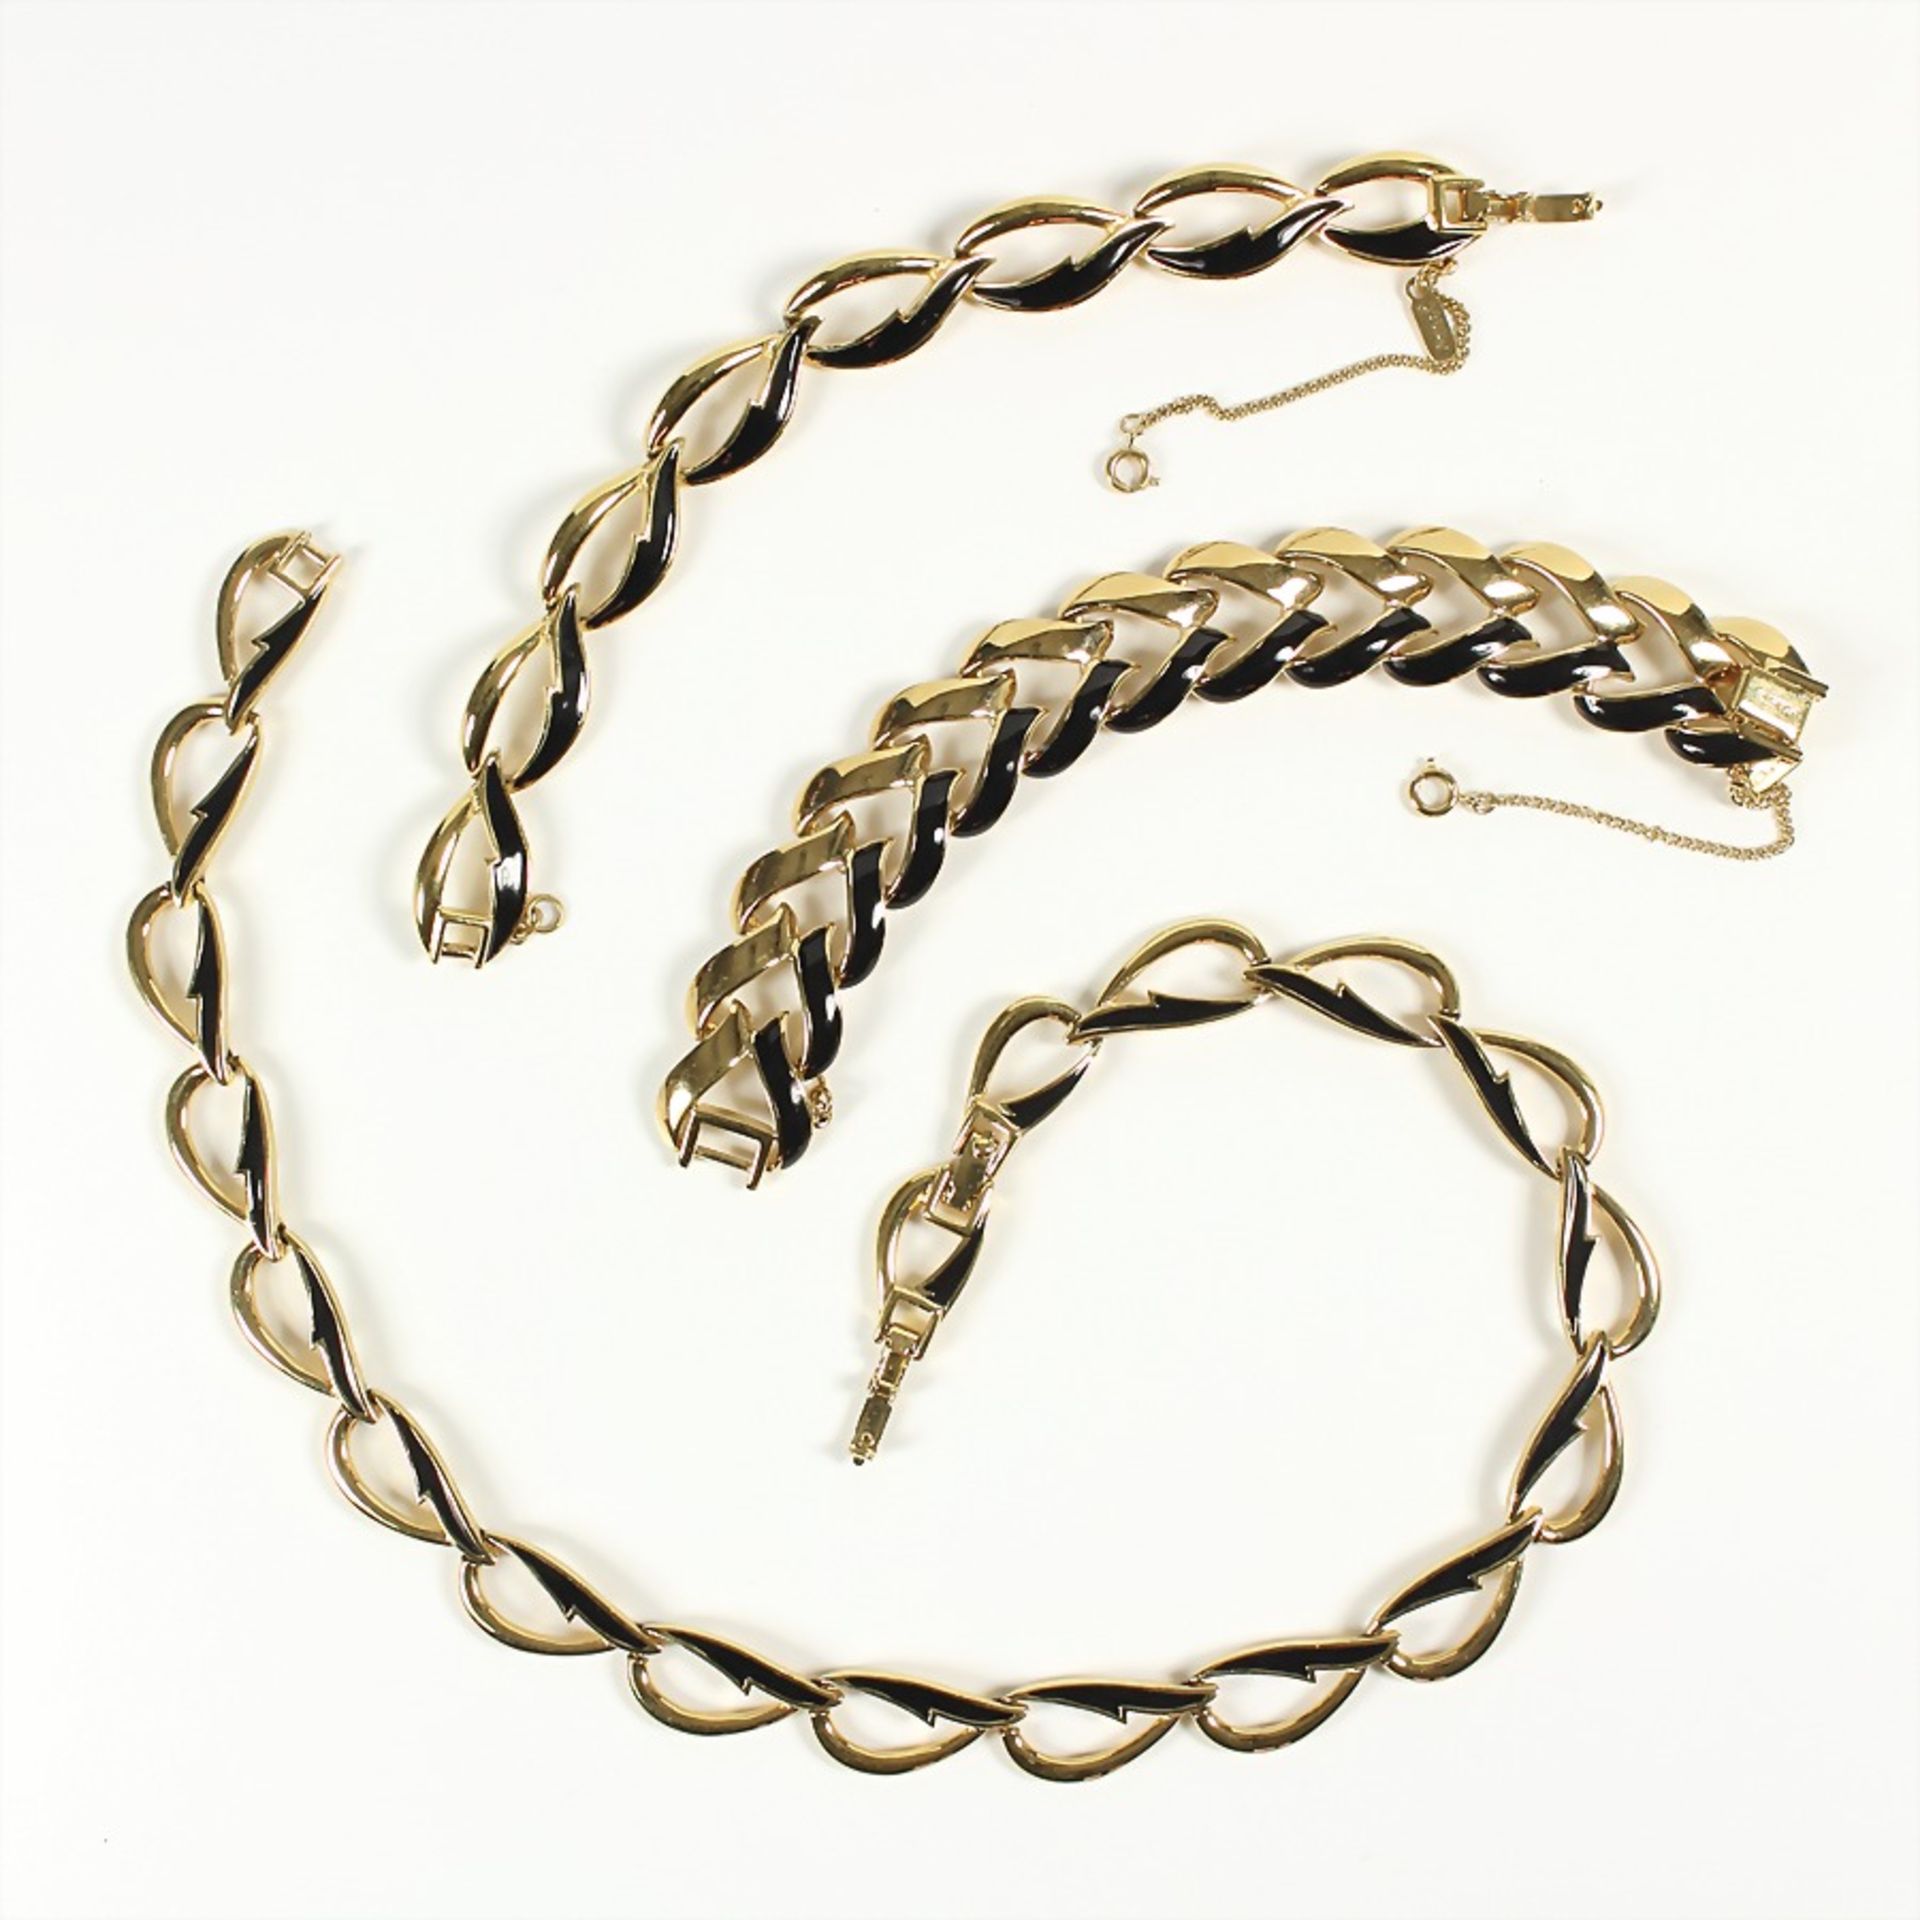 lot: 1 necklace and 2 bracelets with folding clasps, gold colored, signed: "MONET", black enamel